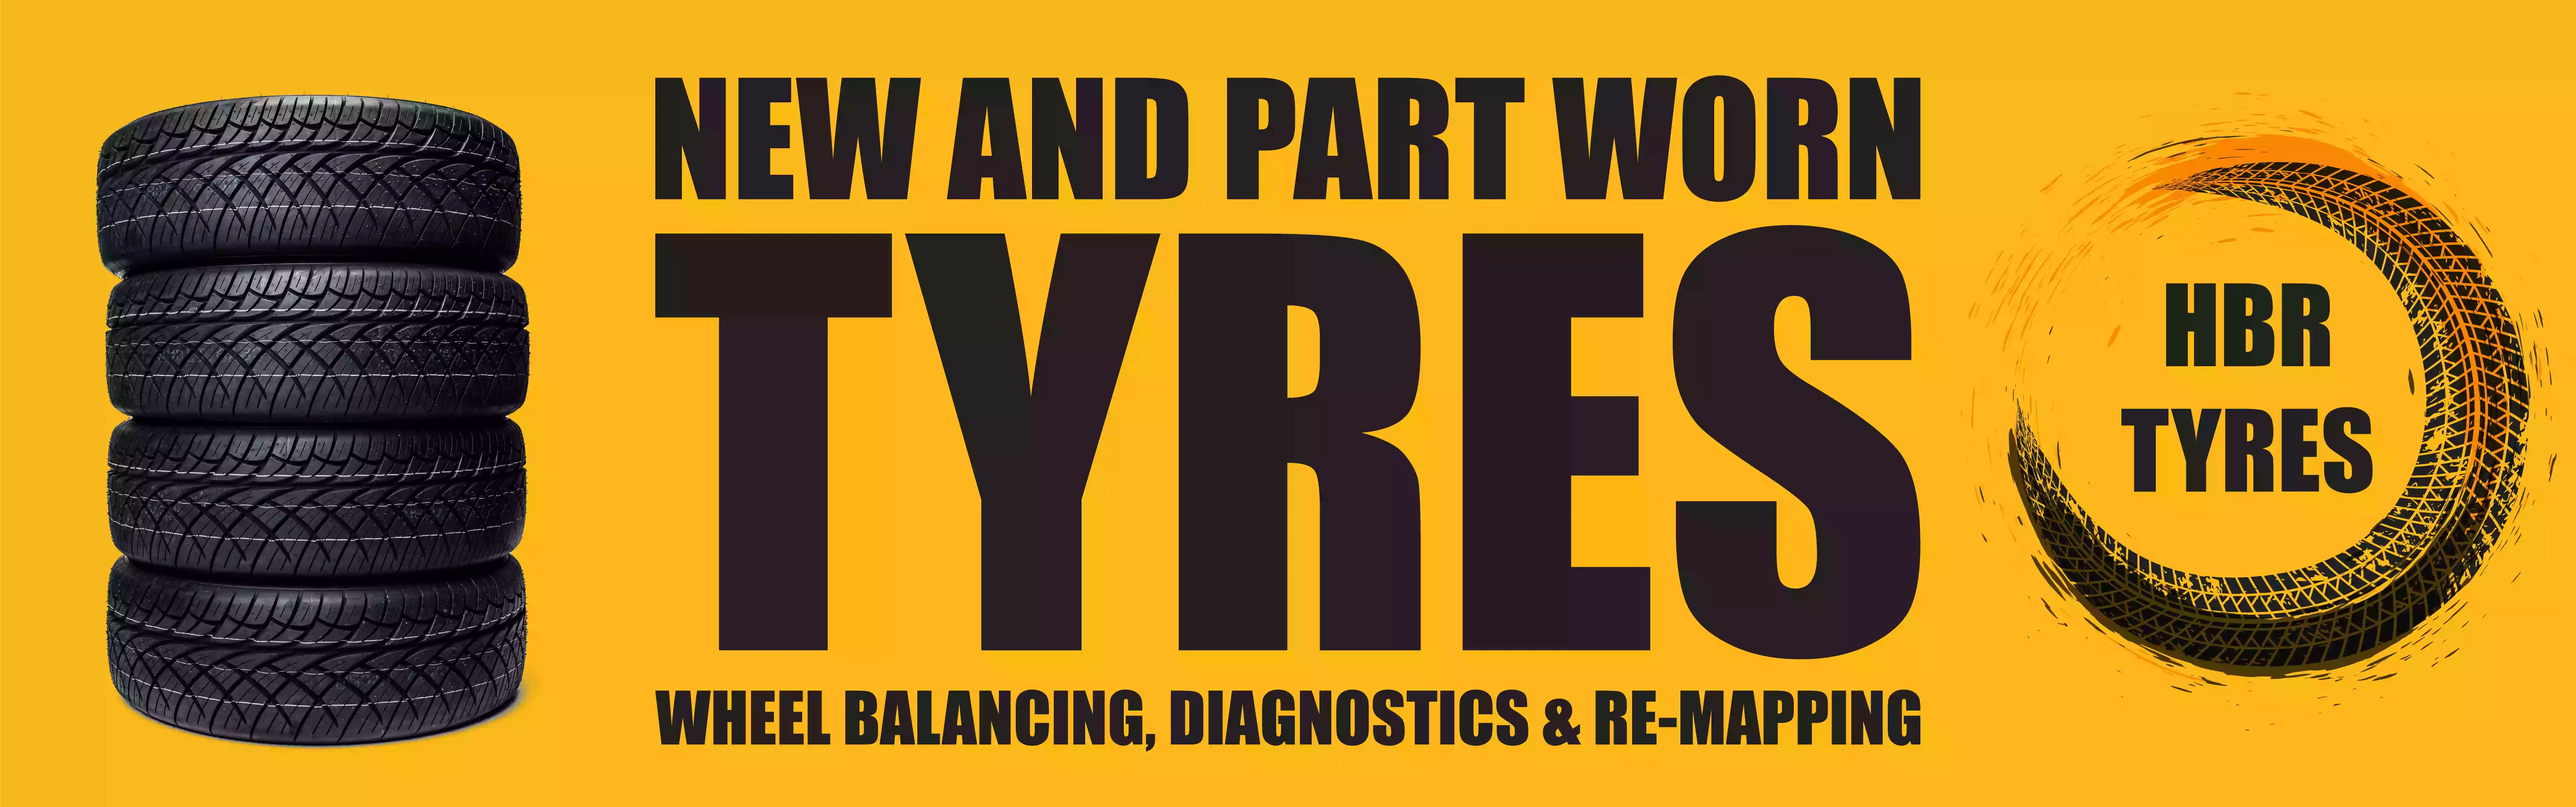 HBR Tyres - Part Worn, Used and New Tyres